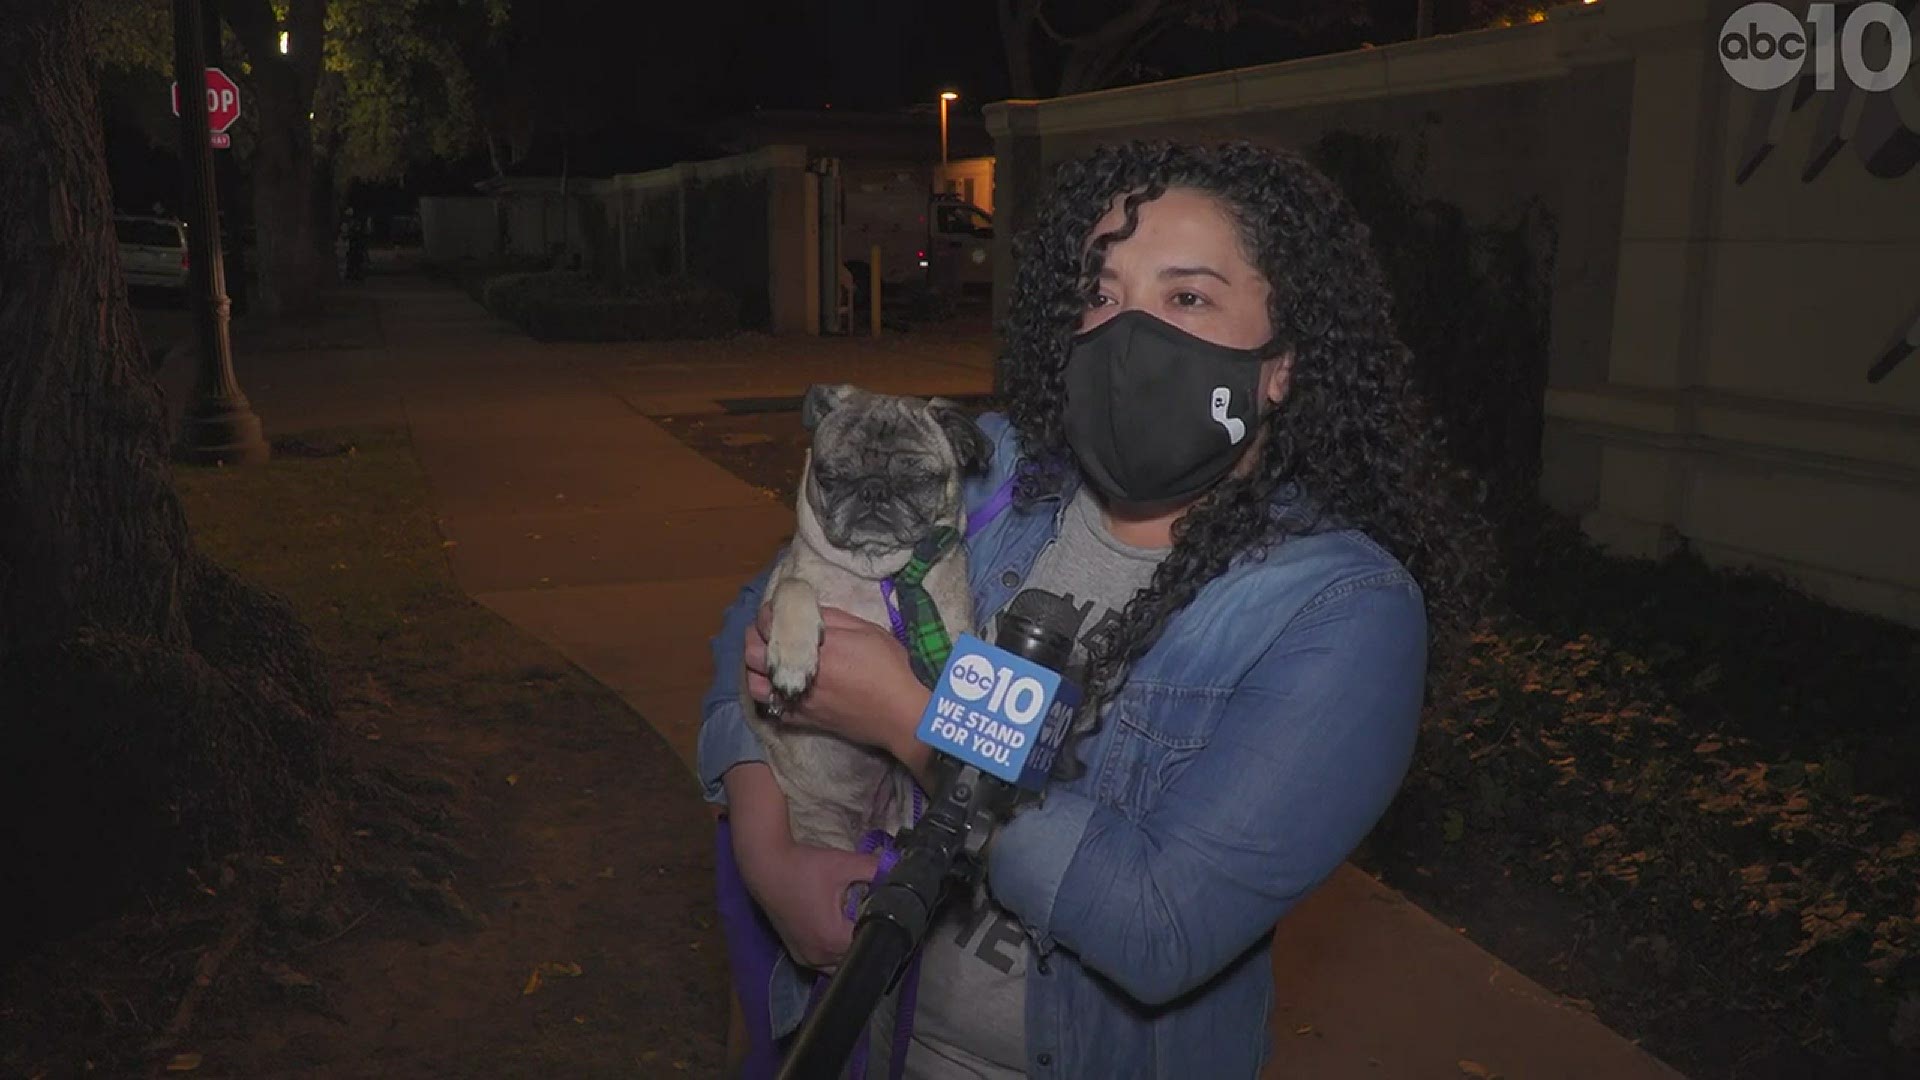 The owner of the dog says she got a call about her pug when they checked his microchip. Now, a volunteer couple is driving 17 hours to reunite the dog and owner.